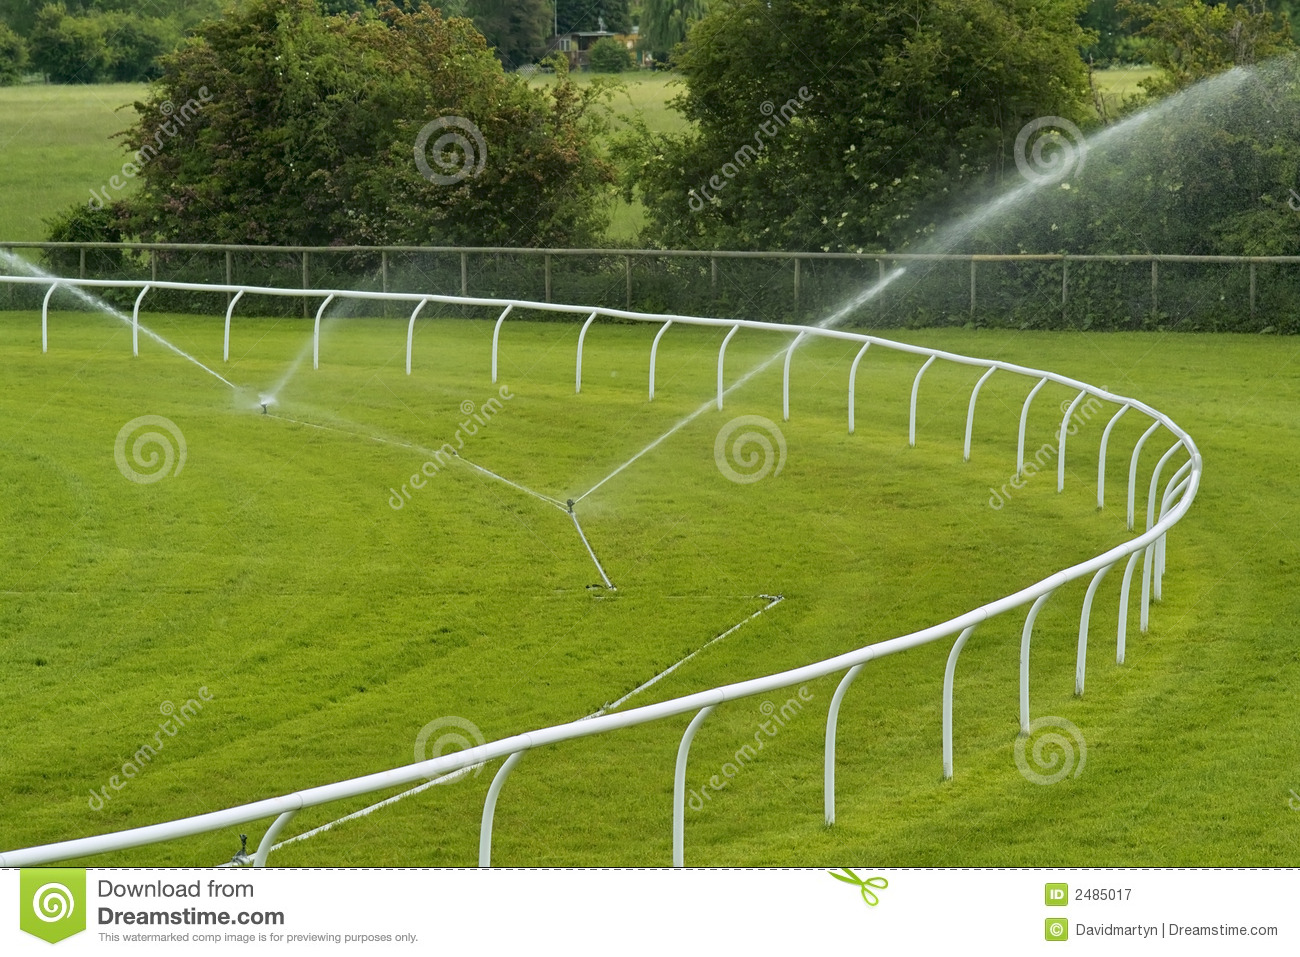 Sprinklers On Racecourse Royalty Free Stock Photography   Image